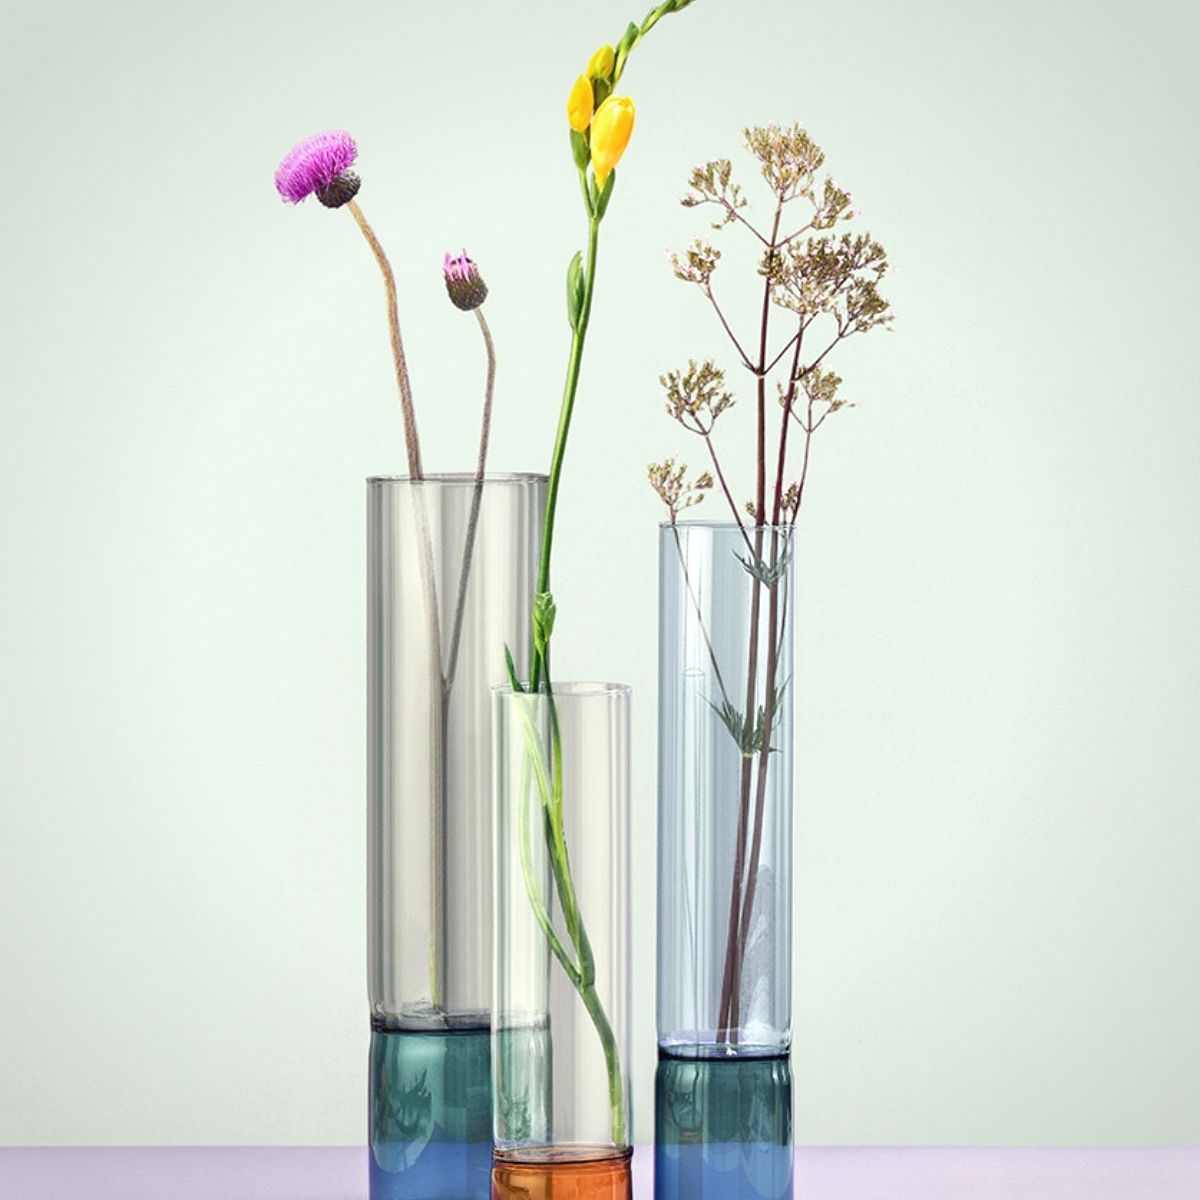 reversible-vases-inspired-by-bamboo-stems-featured